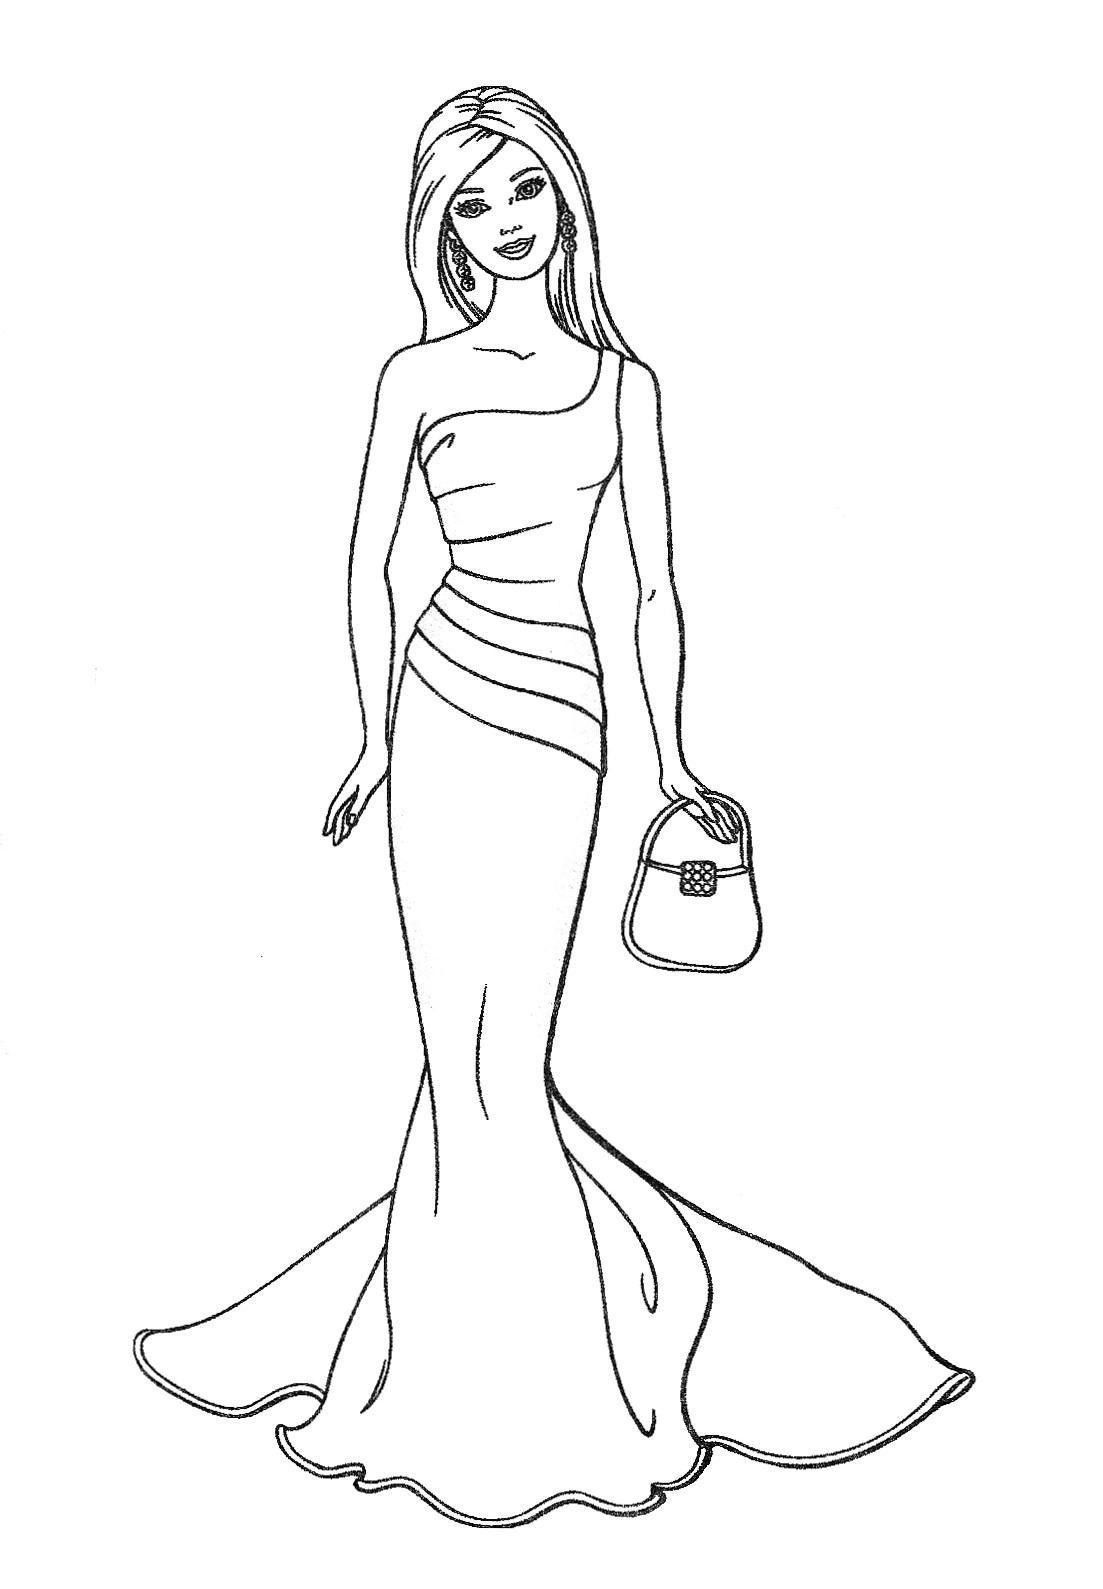 Image - Coloring-for-kids-free-printable-barbie-coloring-pages-in ...